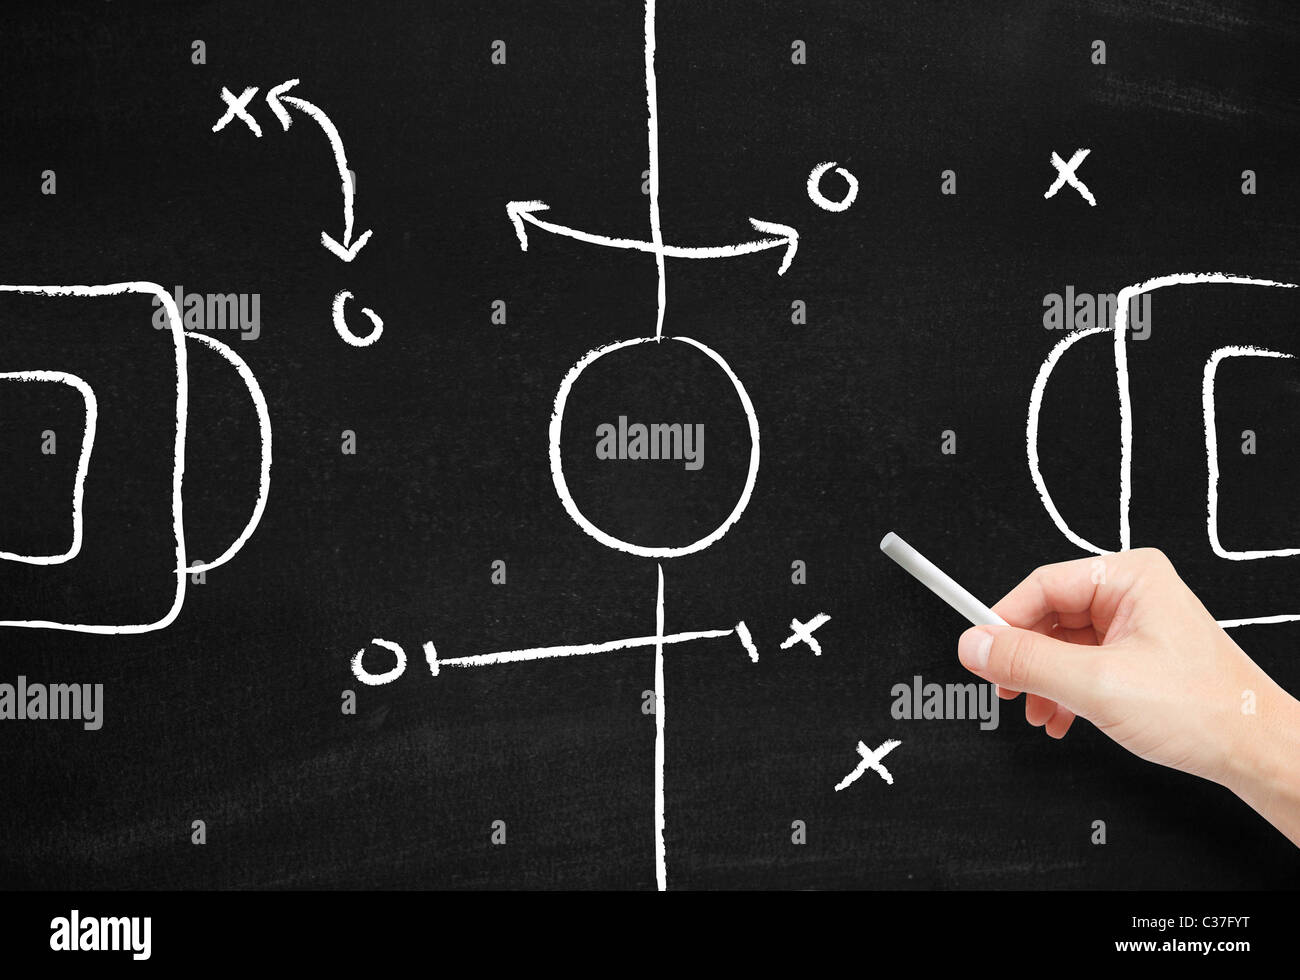 26 To desk ideas  football pitch, football tactics, black and white  football